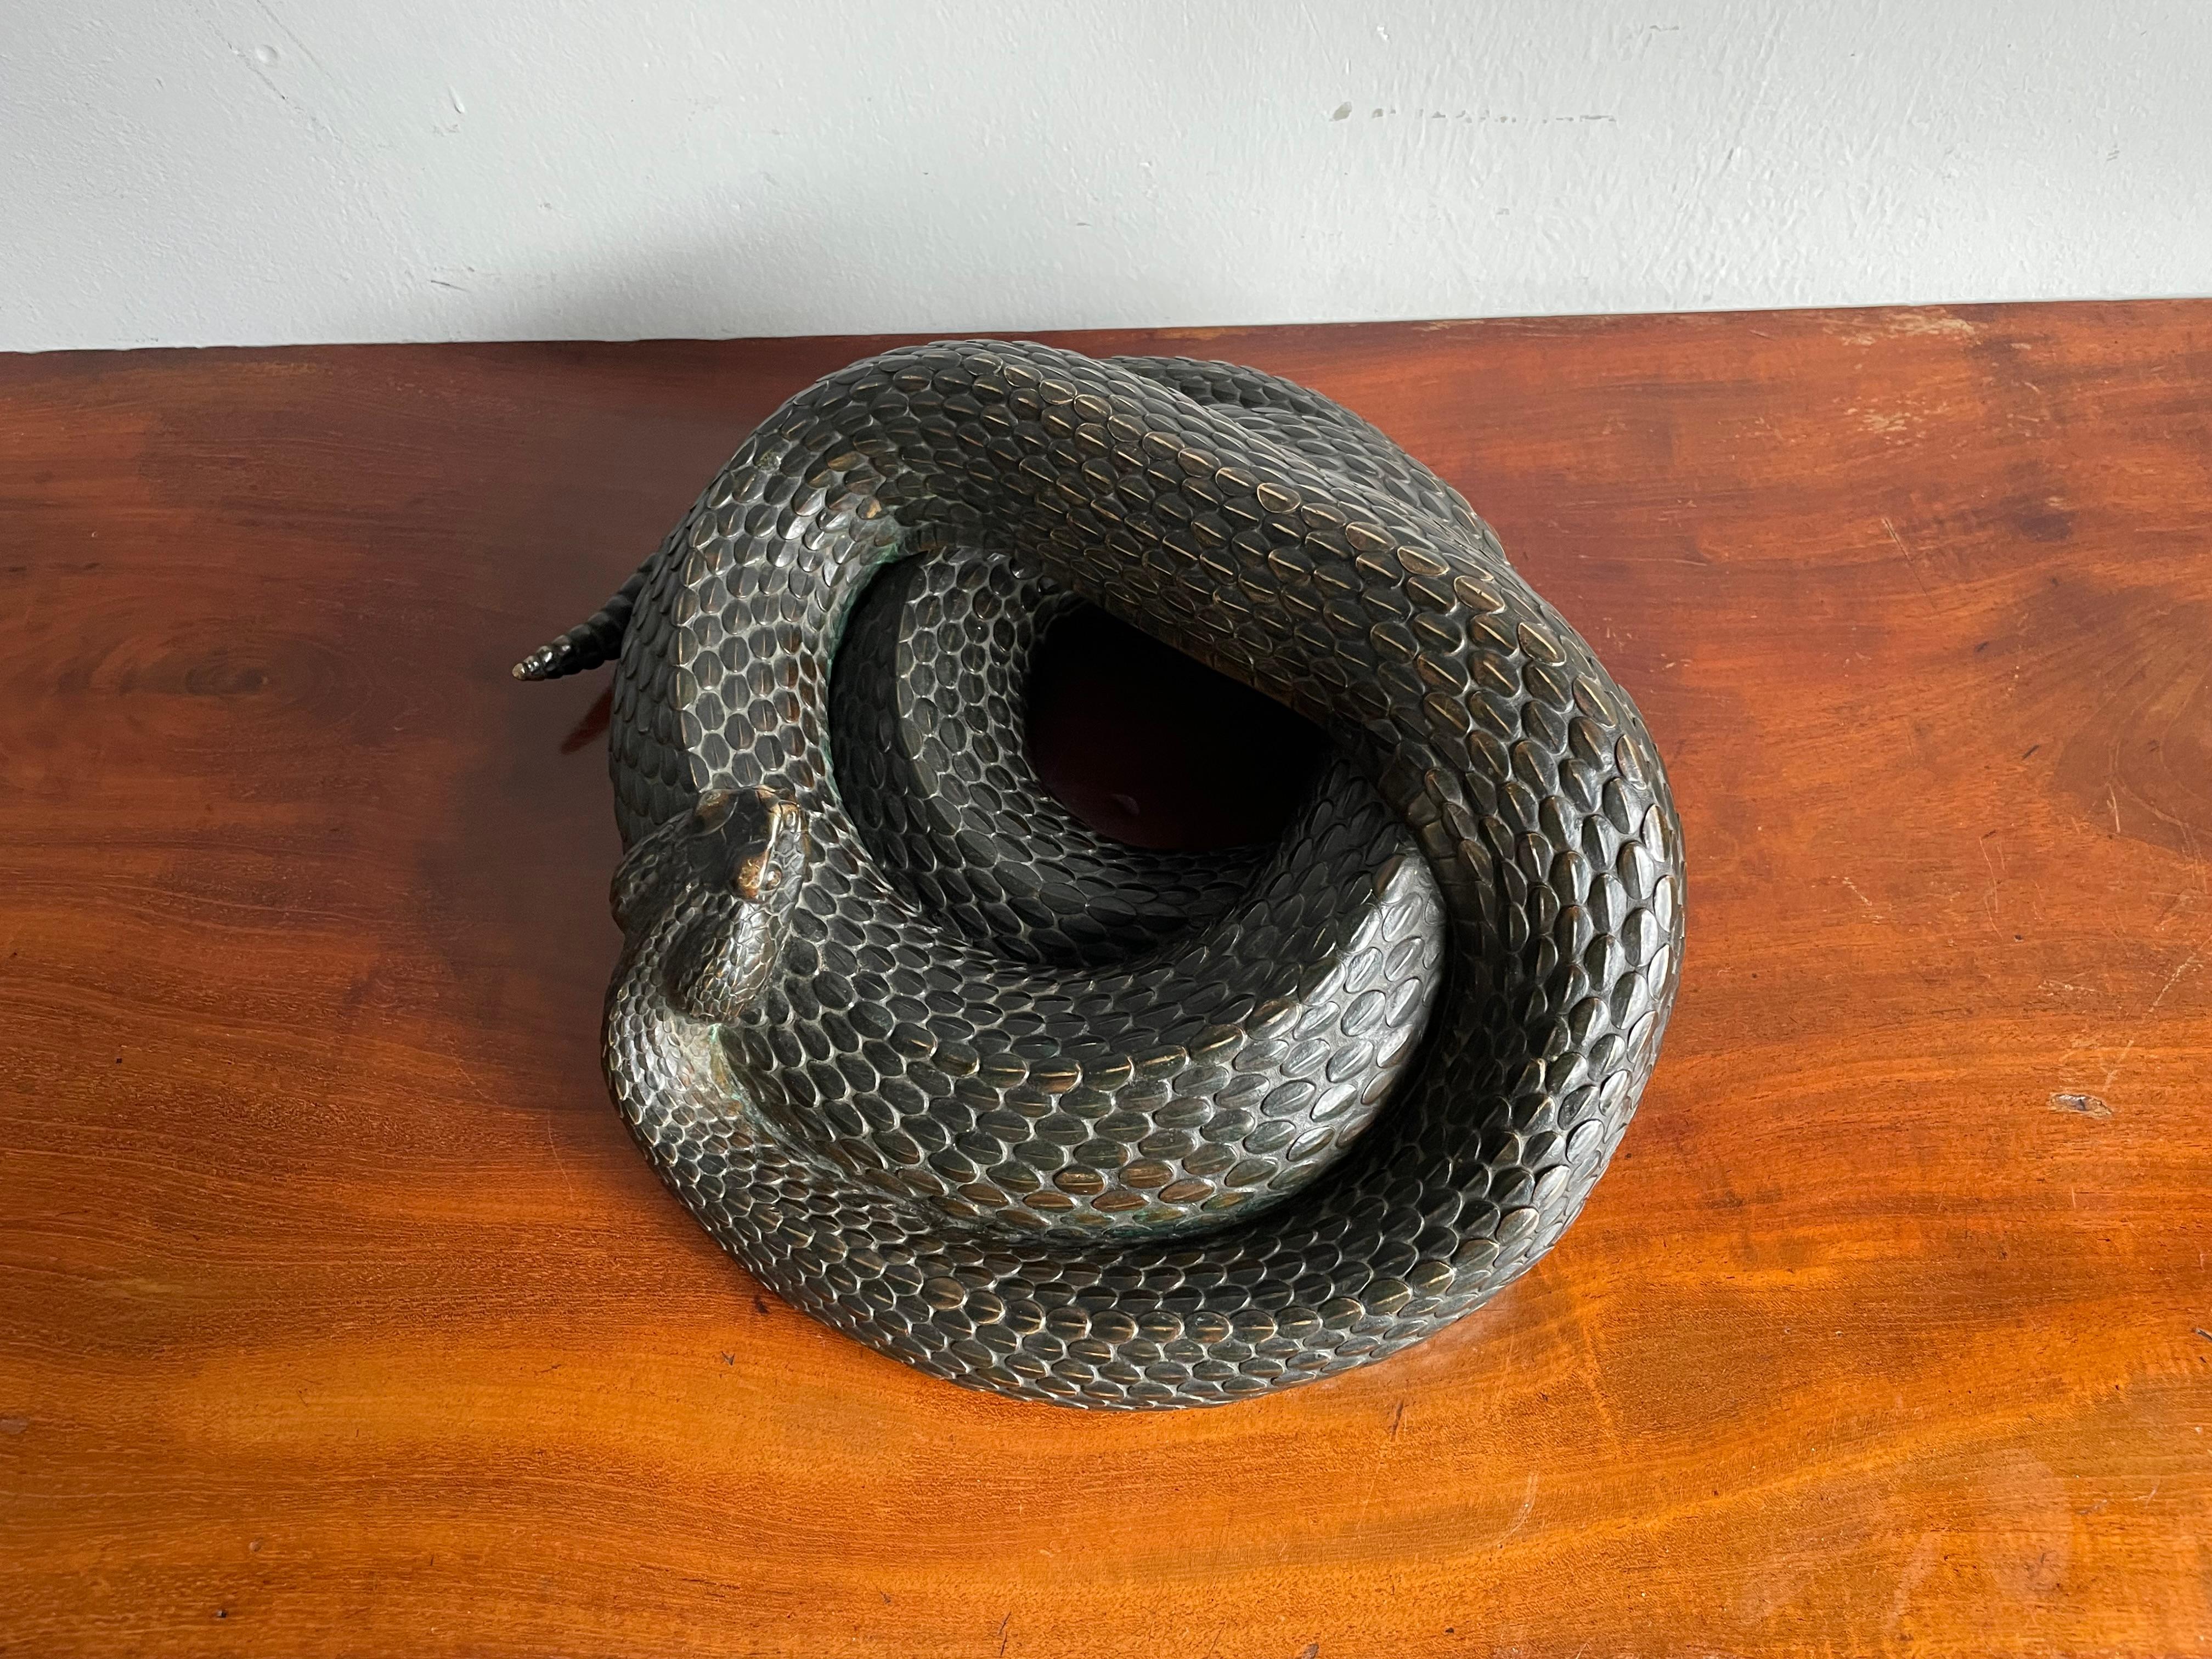 Museum Worthy Antique Bronze Coiled Rattlesnake Sculpture Signed & Marked 1885  For Sale 12